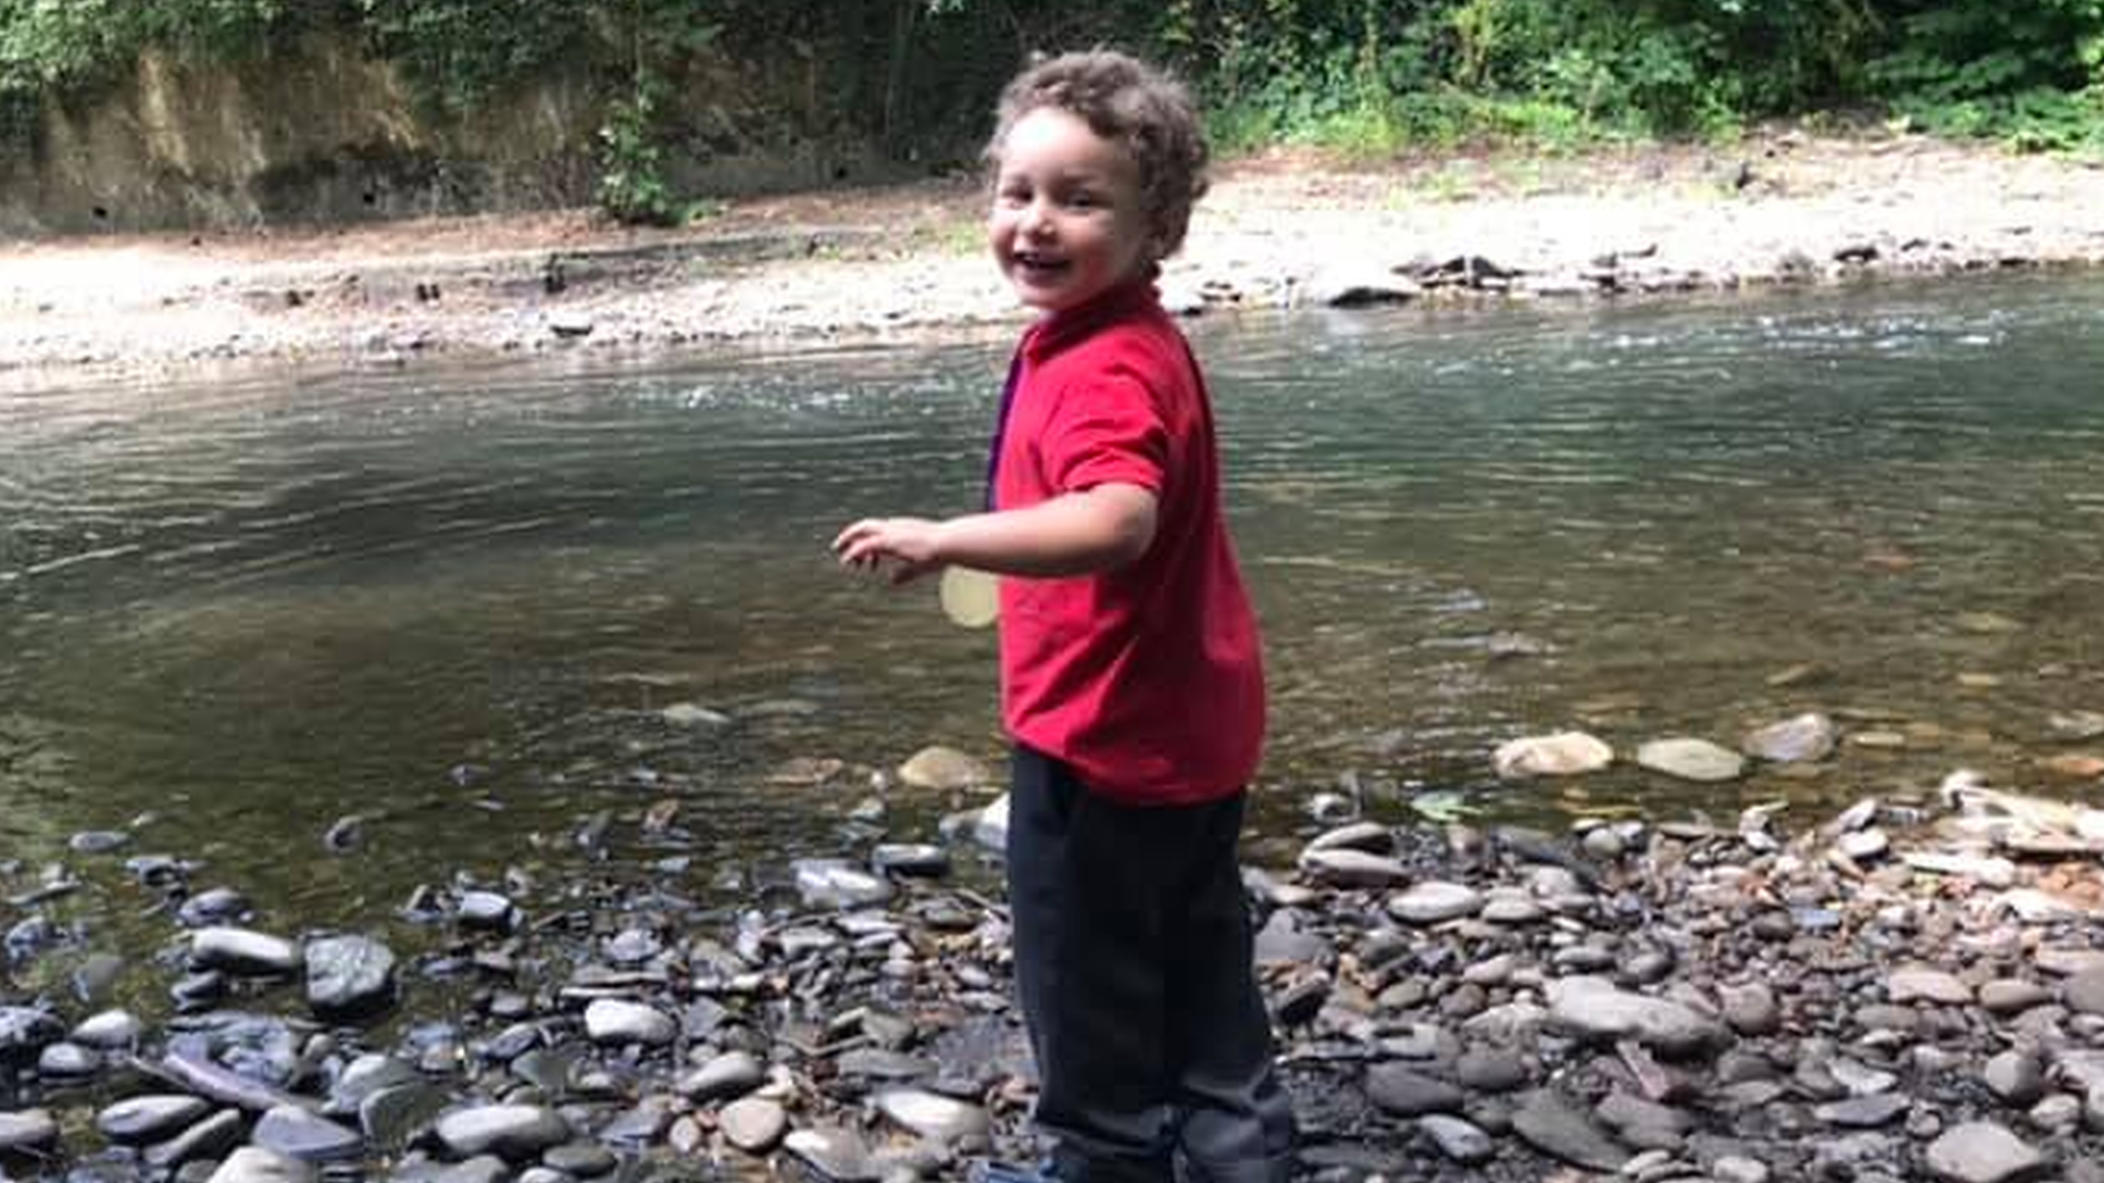 Pictured: The five year old who died in Ogmore river, named locally as Logan Williamson, pictured by Ogmore river on July 2019.Re: South Wales Police can confirm that  three people have been arrested following reports of concerns for a missing 5 year